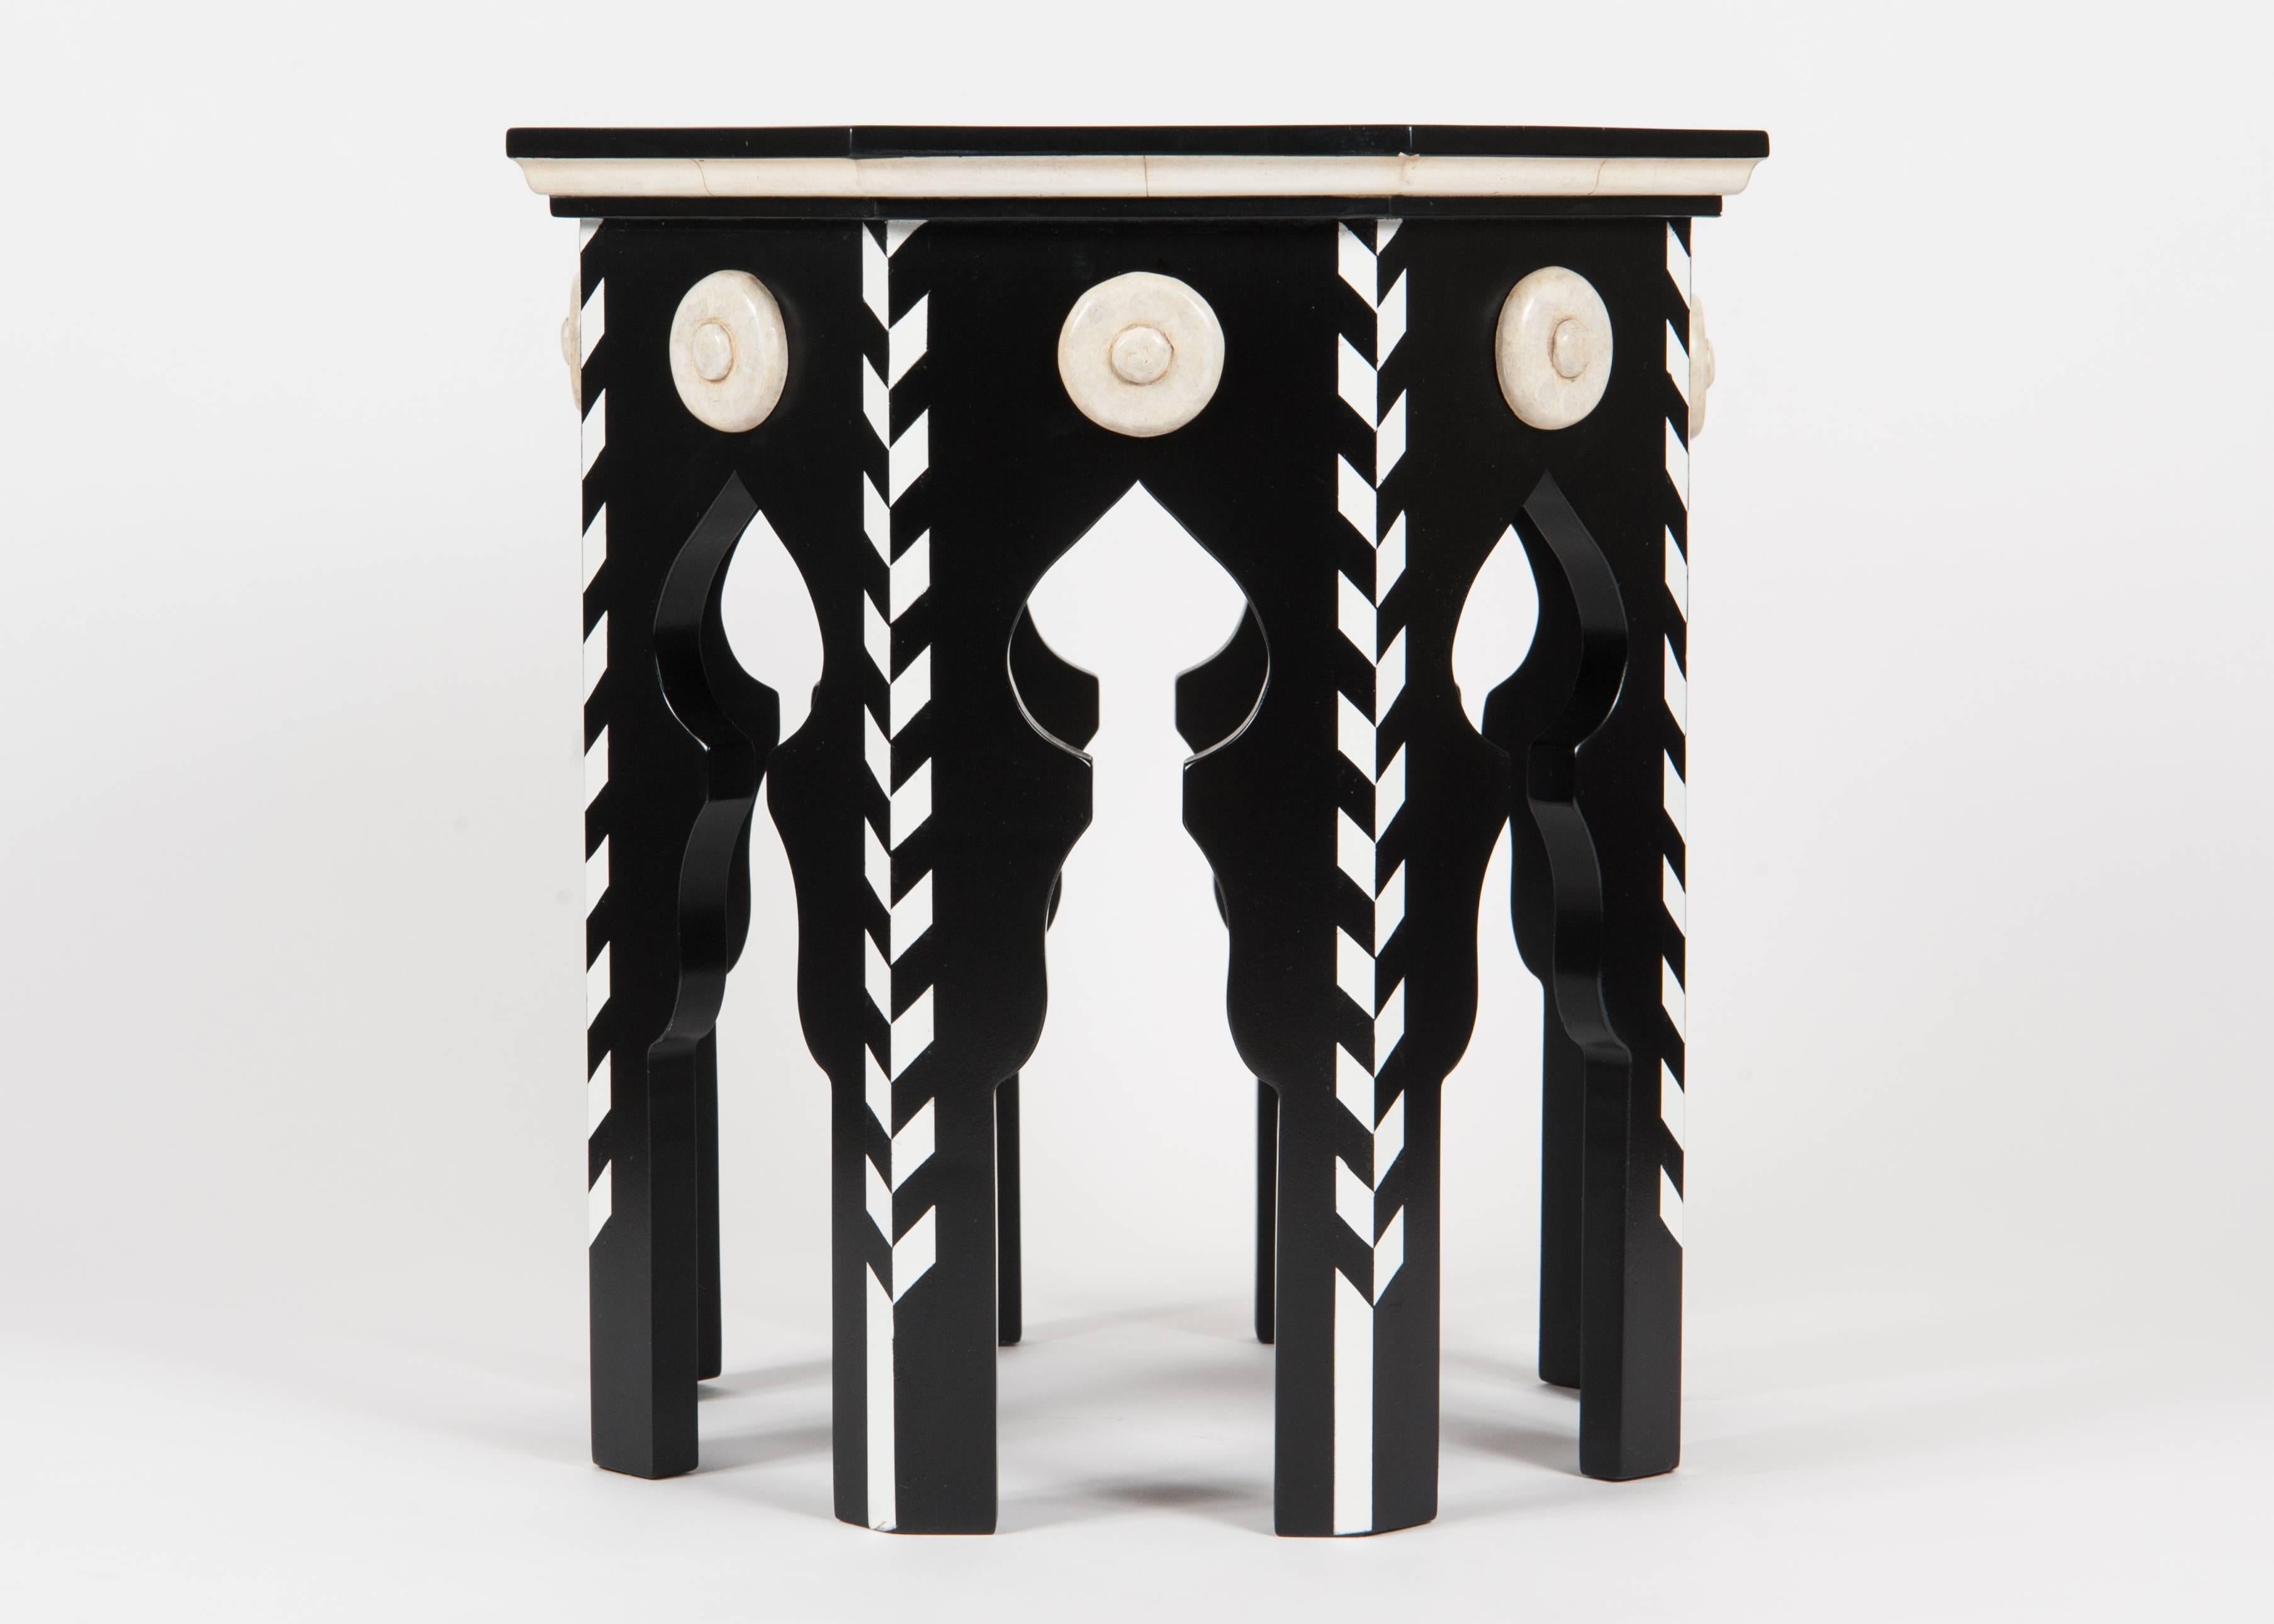 Martyn Lawrence Bullard's custom pasha side table in ebony finish and faux ivory details.
Priced on above finish, please ask for a quote for other finishes.